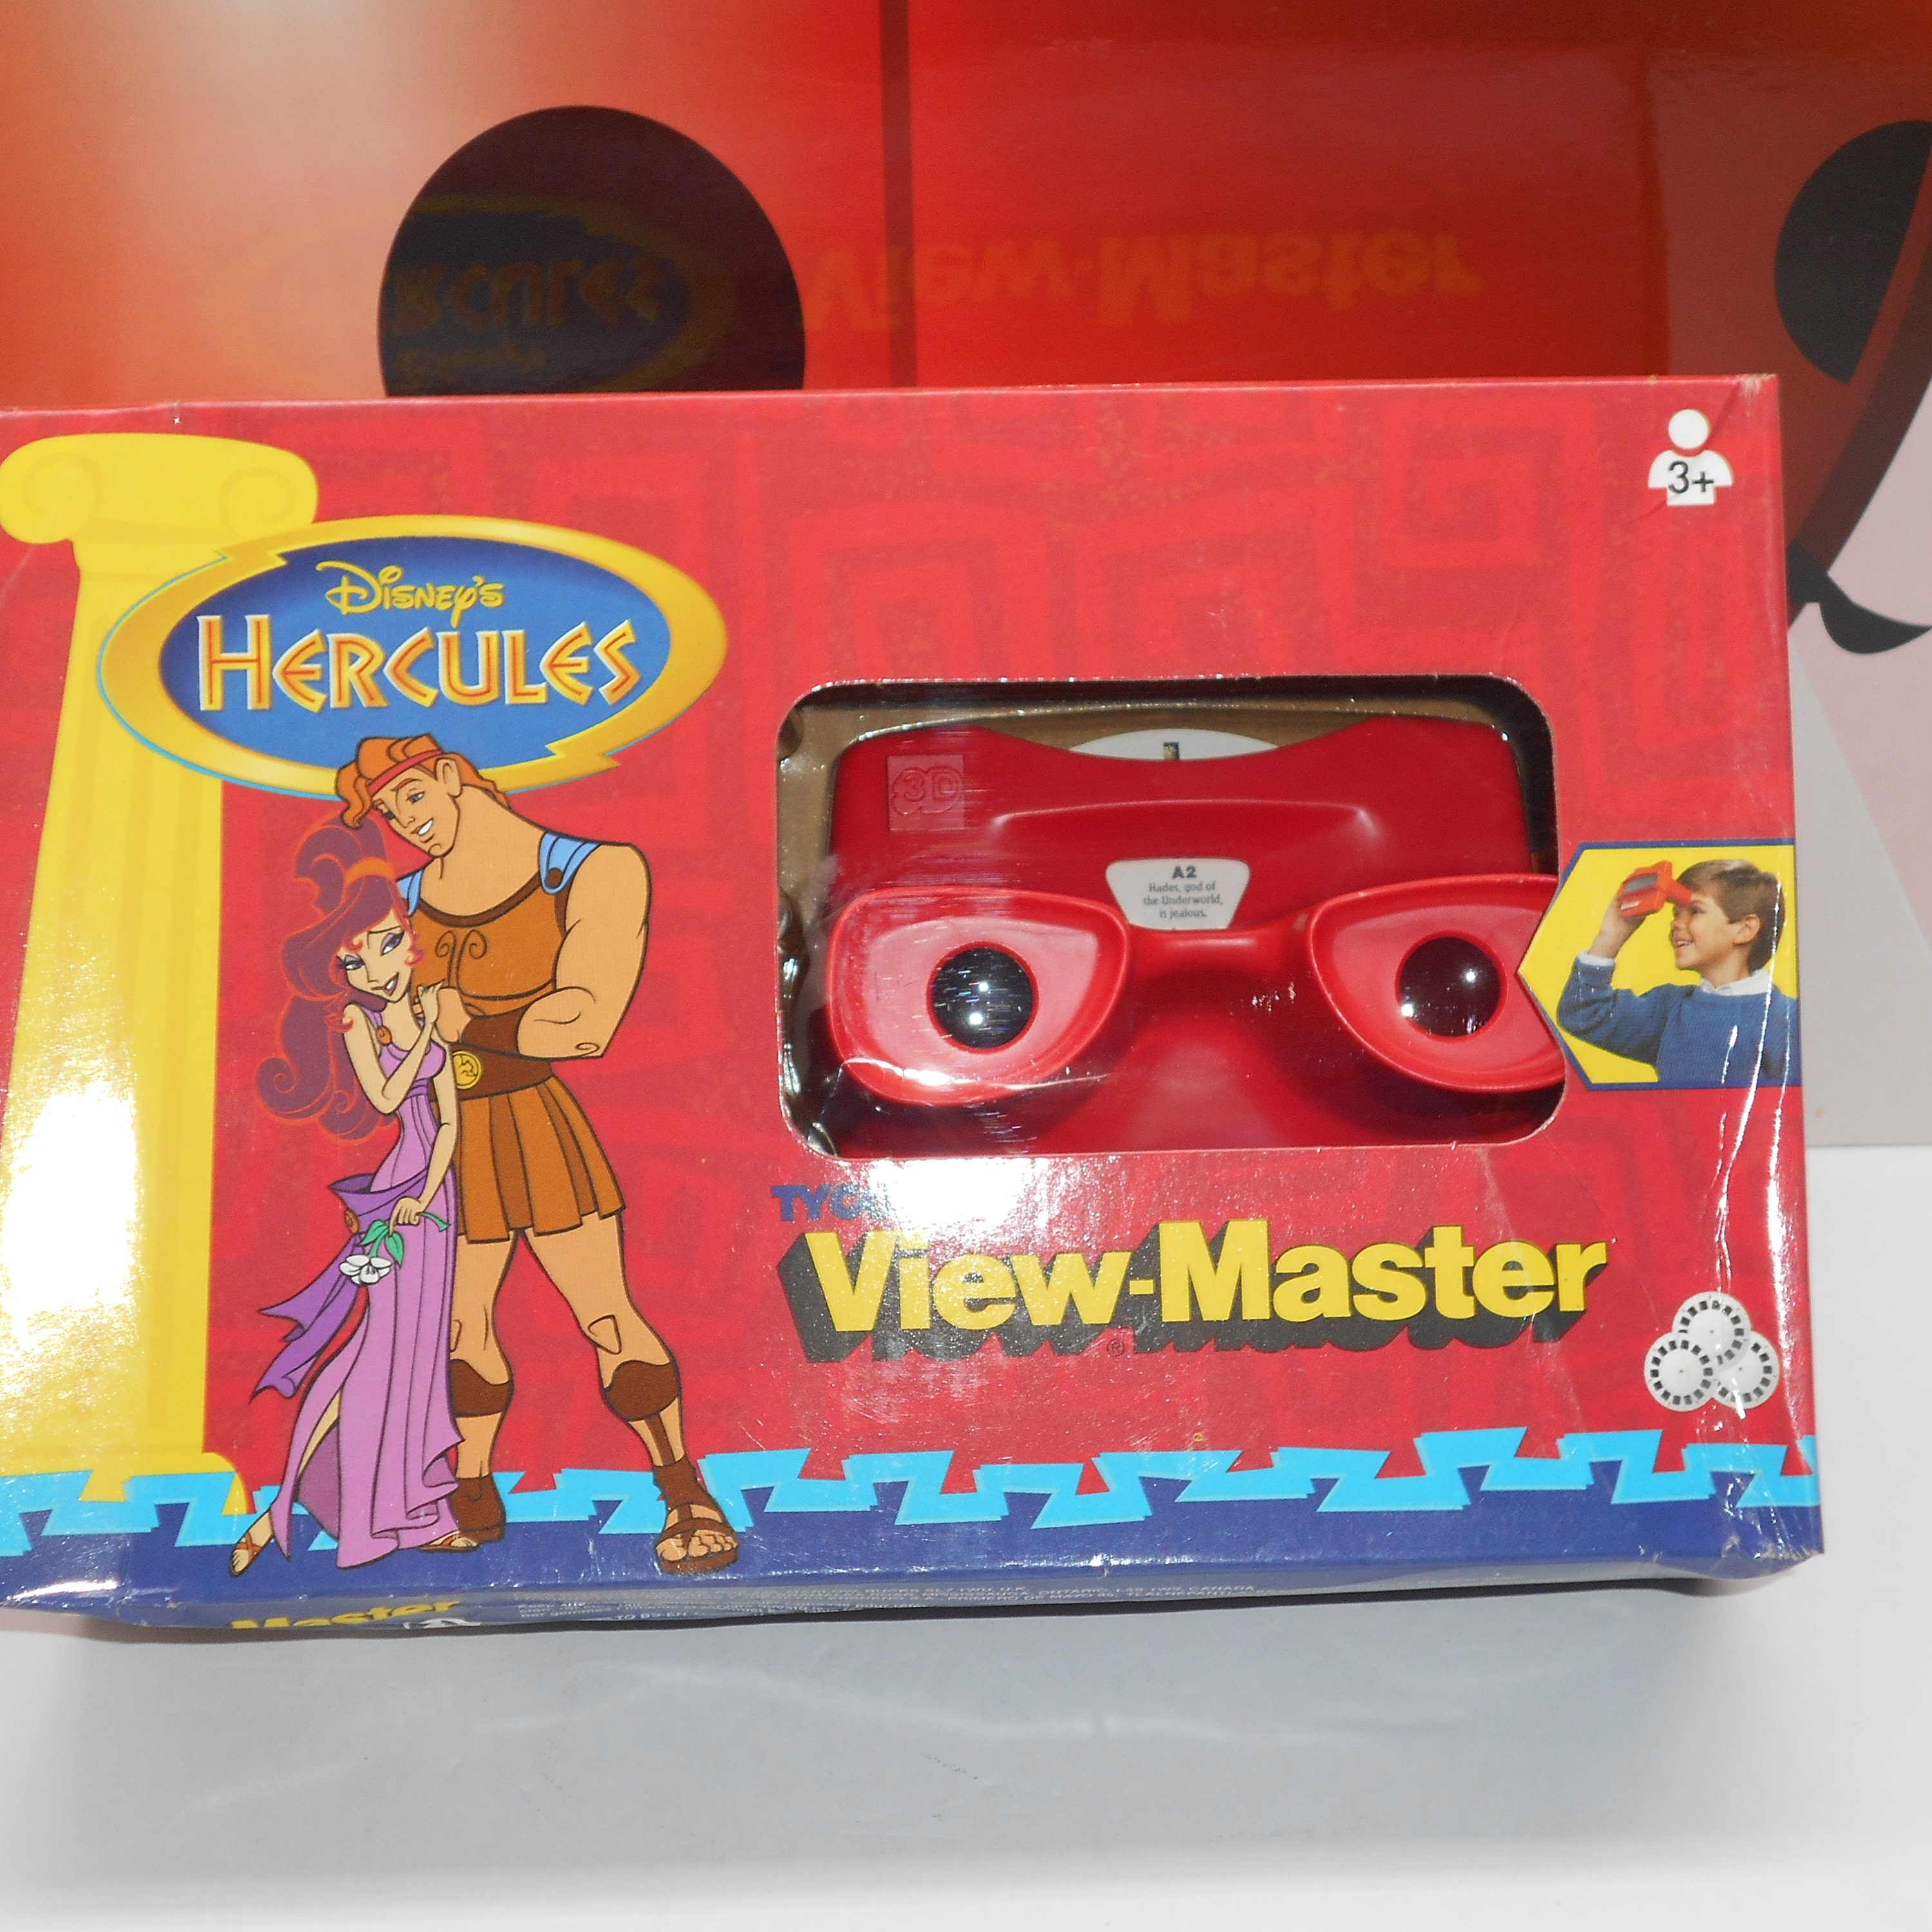 2006 Beauty and the Beast Mattel VIEW-MASTER Disney PRINCESS 3D Reels  Factory Sealed C7166 